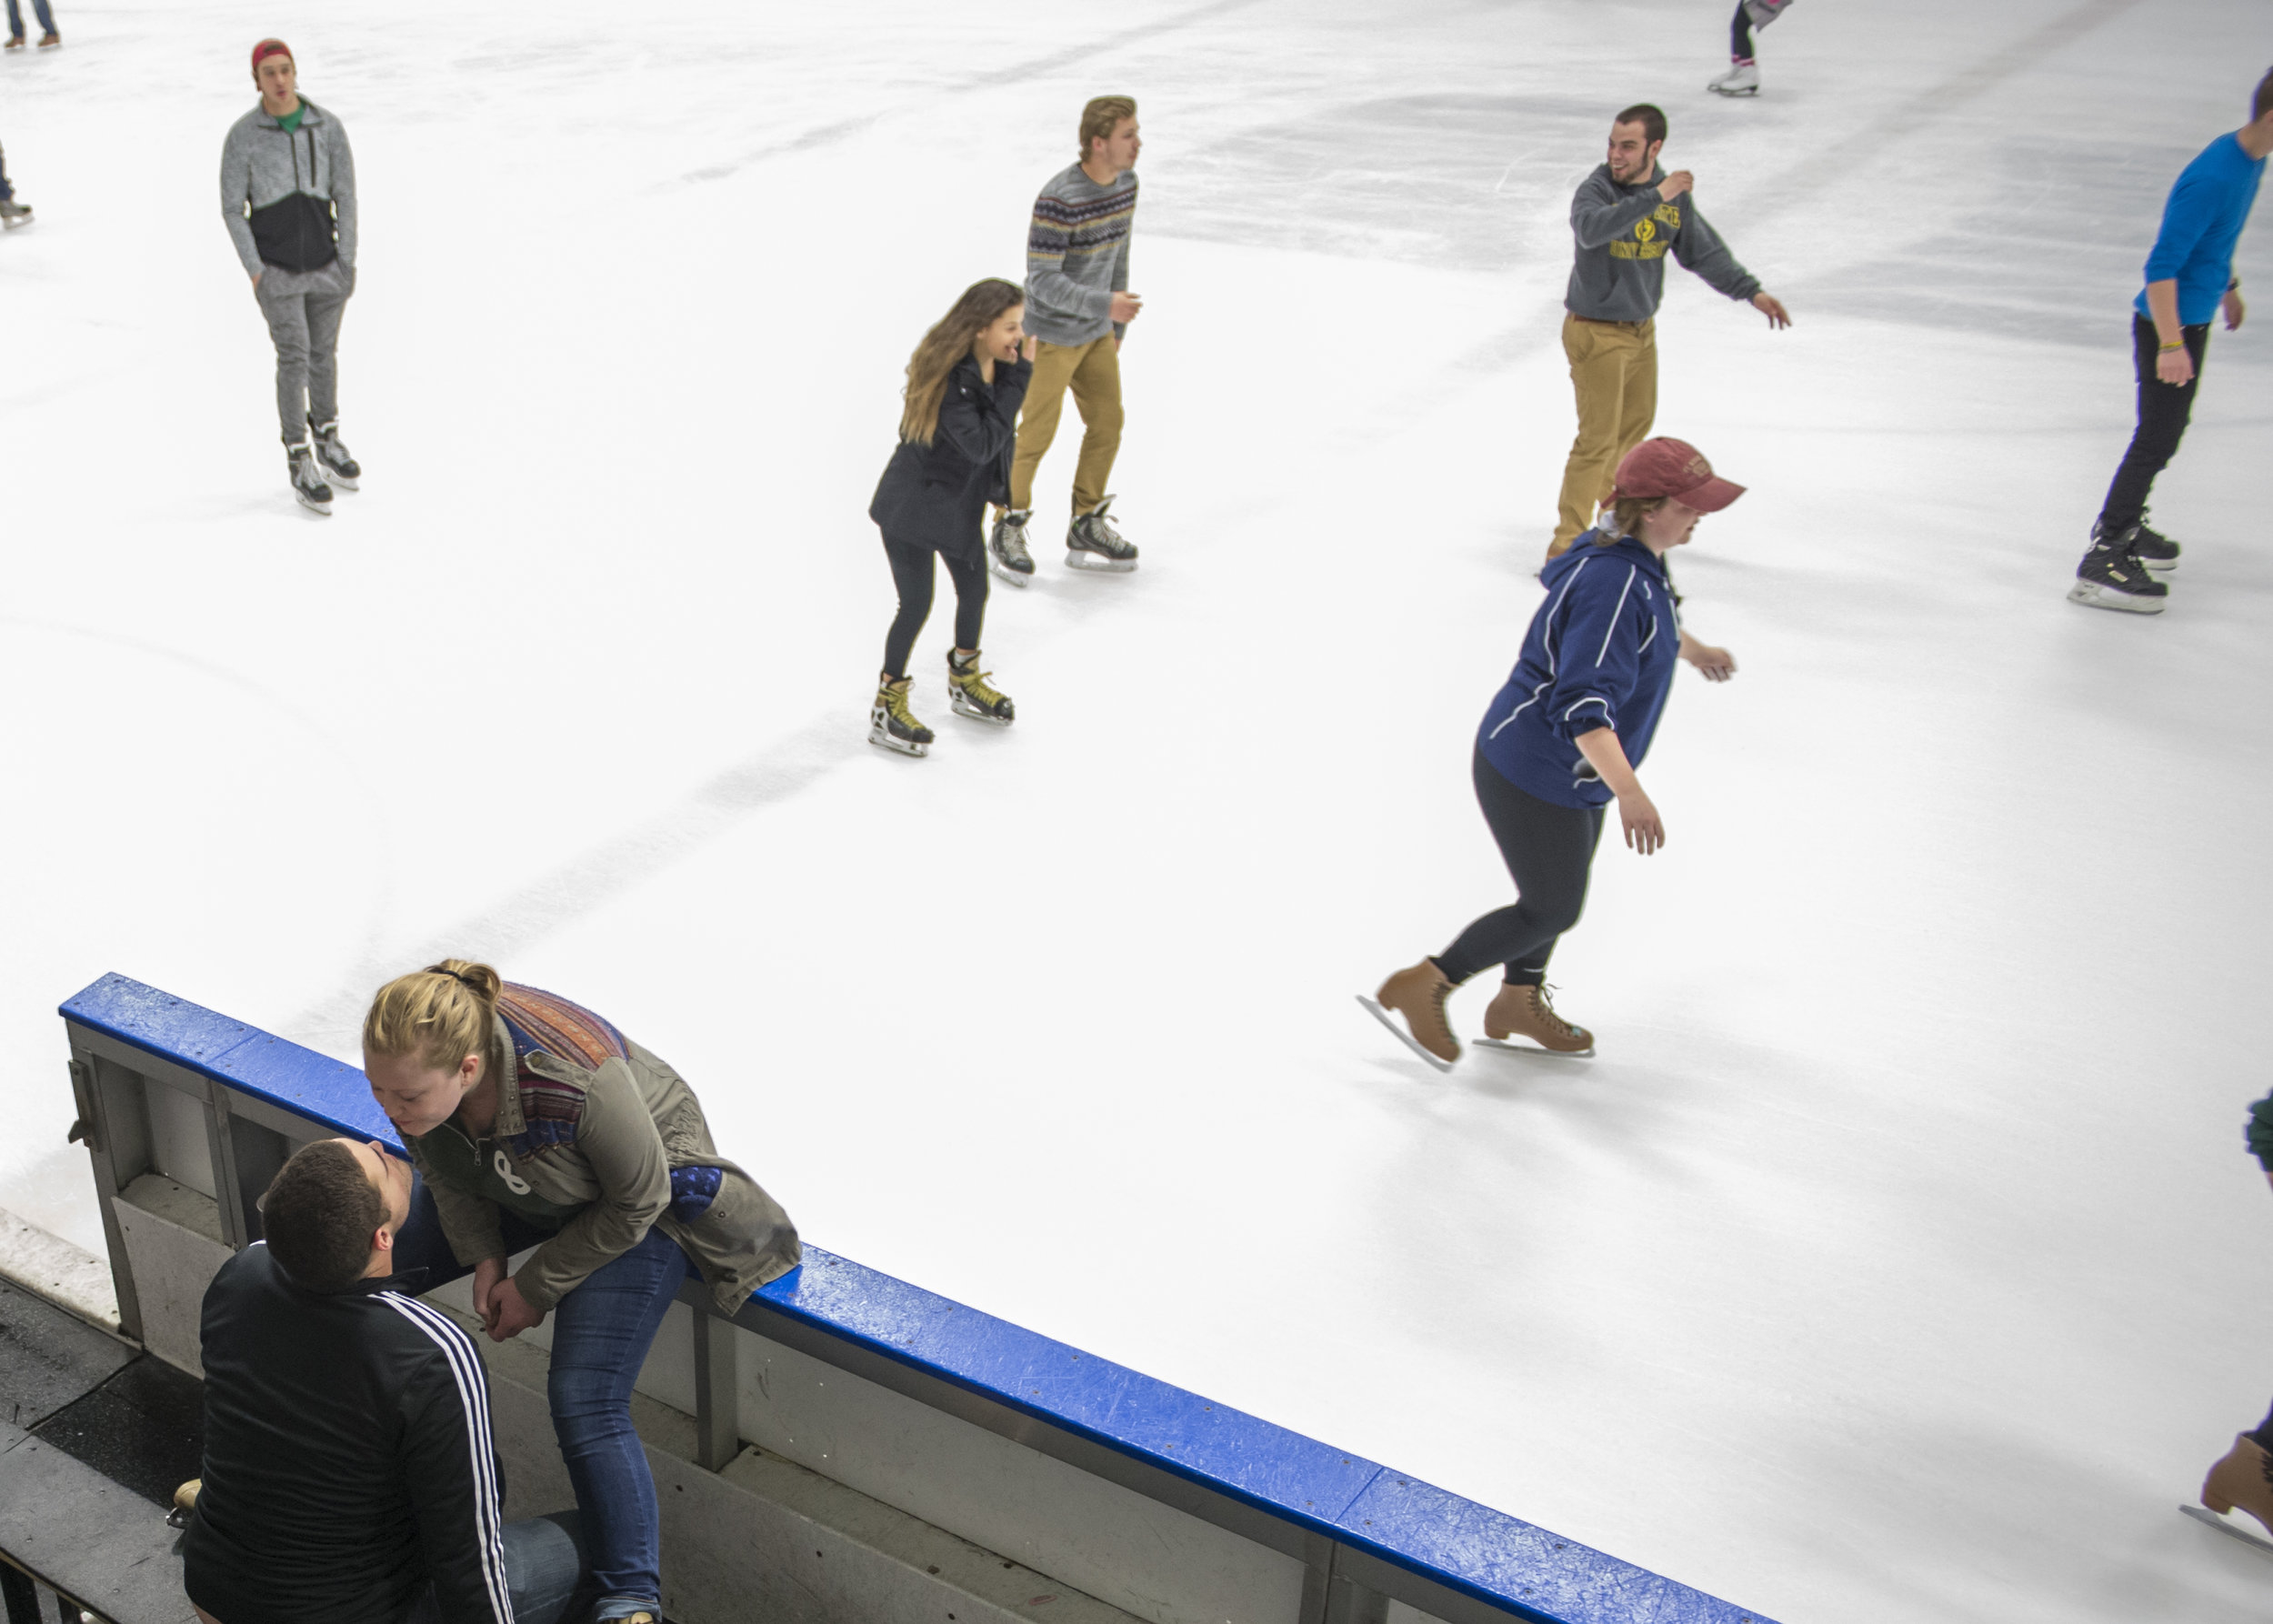   Senior Garrett Birk leans in to kiss his girlfriend Katie Lach while at open skate at Bird Arena. Members of the trombone section often go to Bird to skate together.   